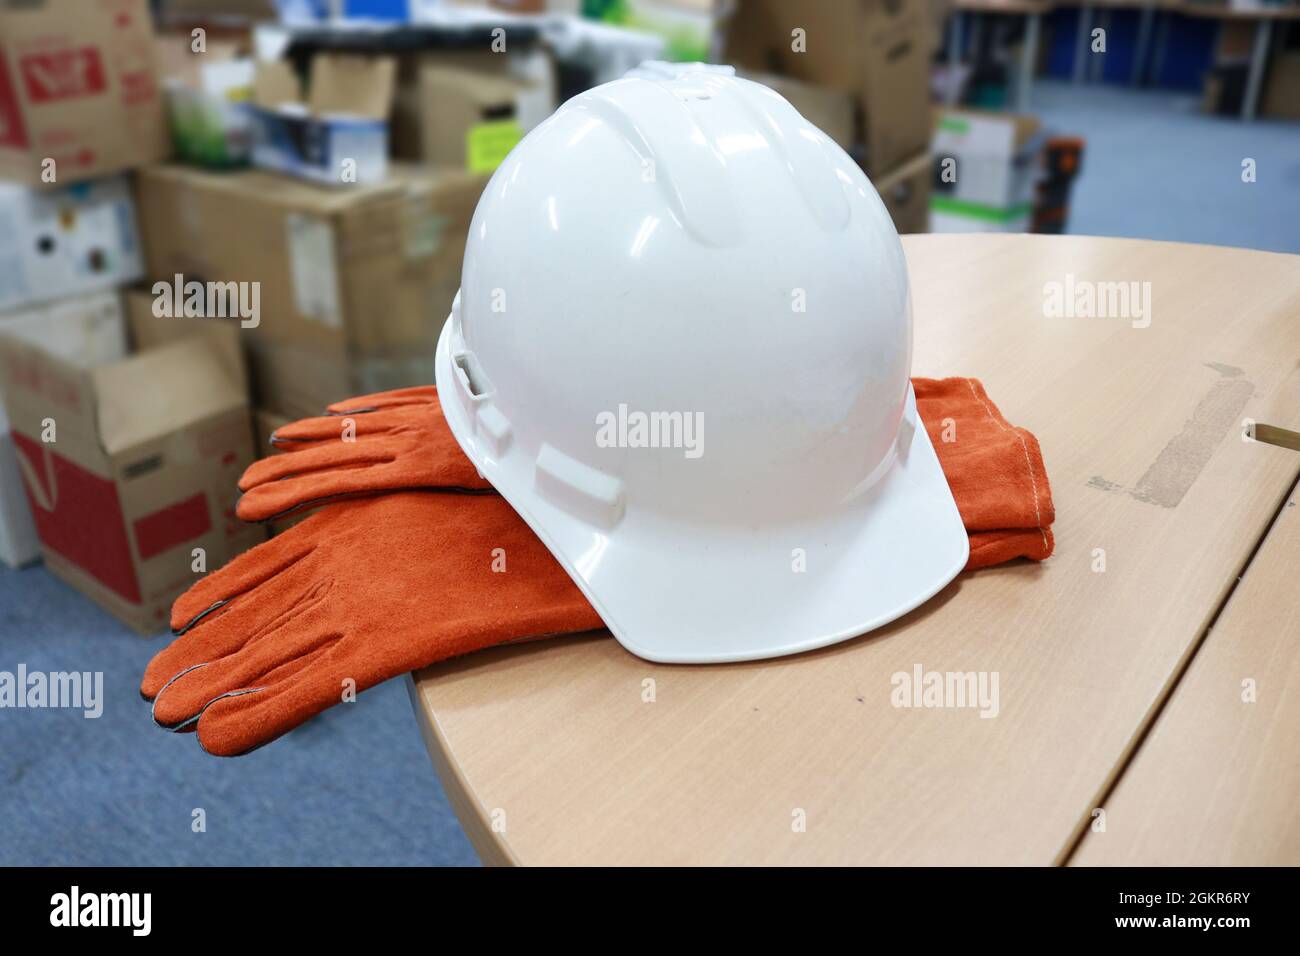 White safety helmet to protect workers' heads from work accidents, such as collisions with hard objects, leather gloves to protect hands, Stock Photo